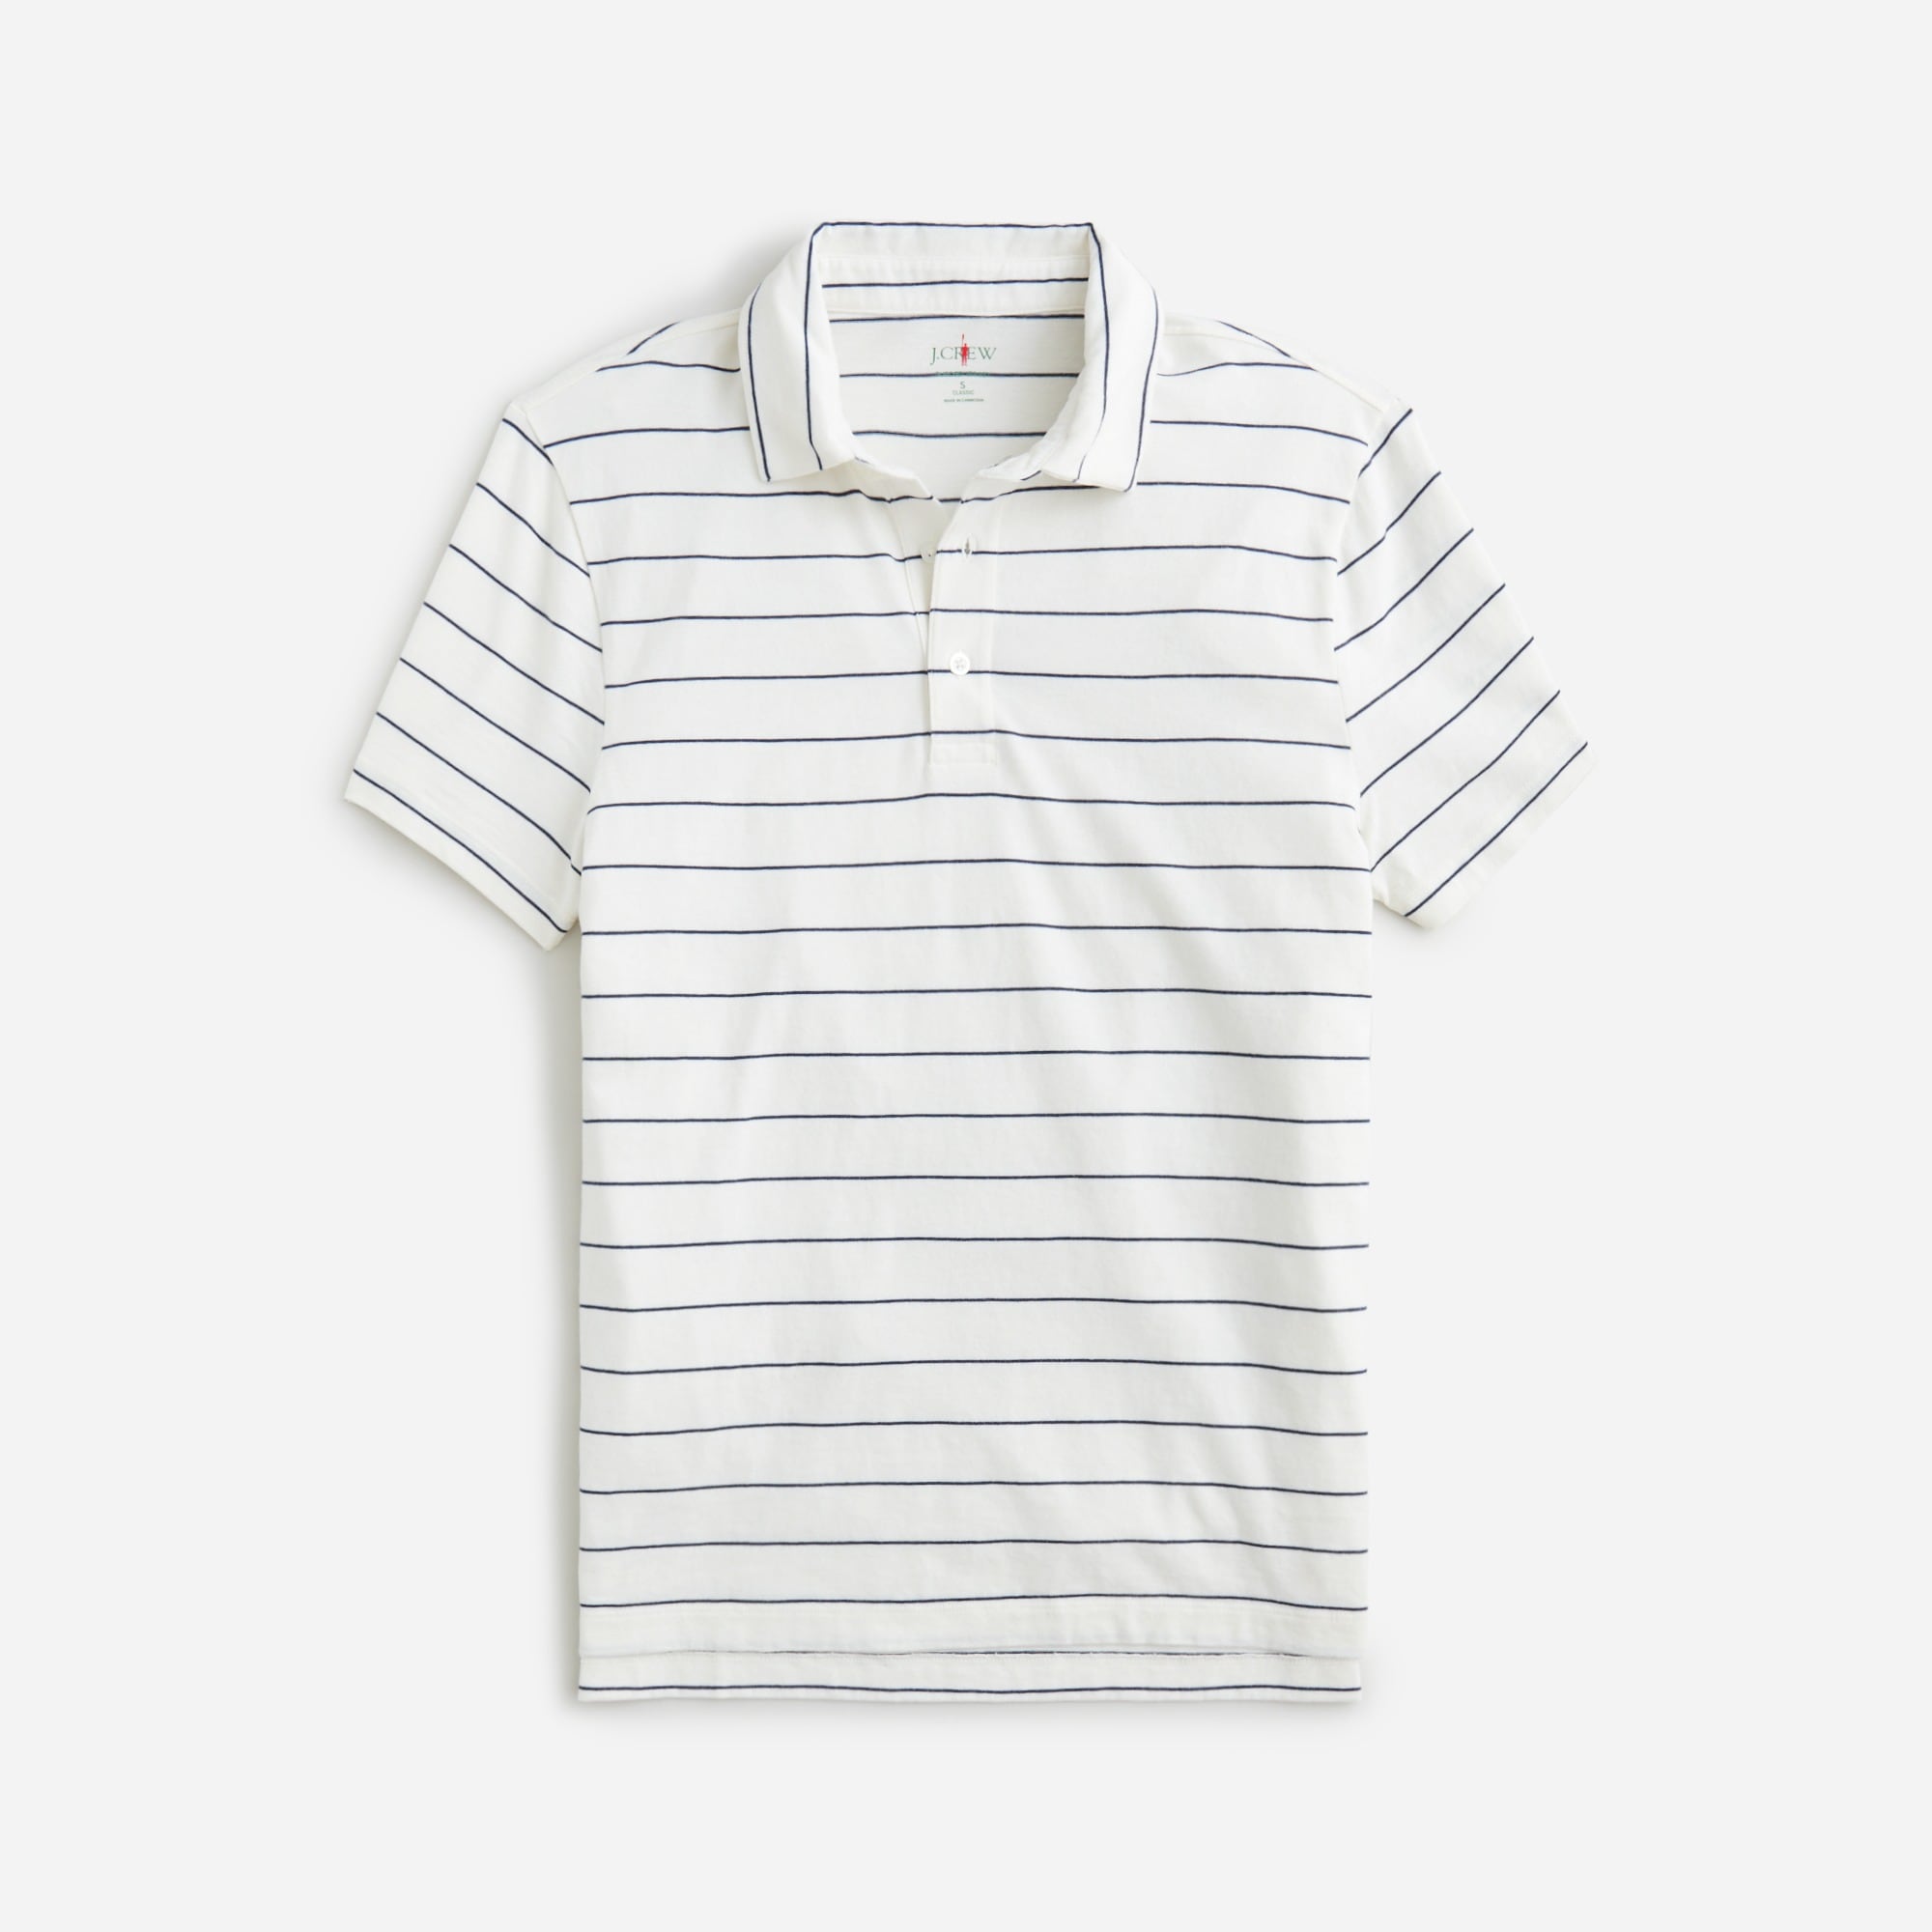 mens Classic Untucked sueded cotton polo shirt in stripe